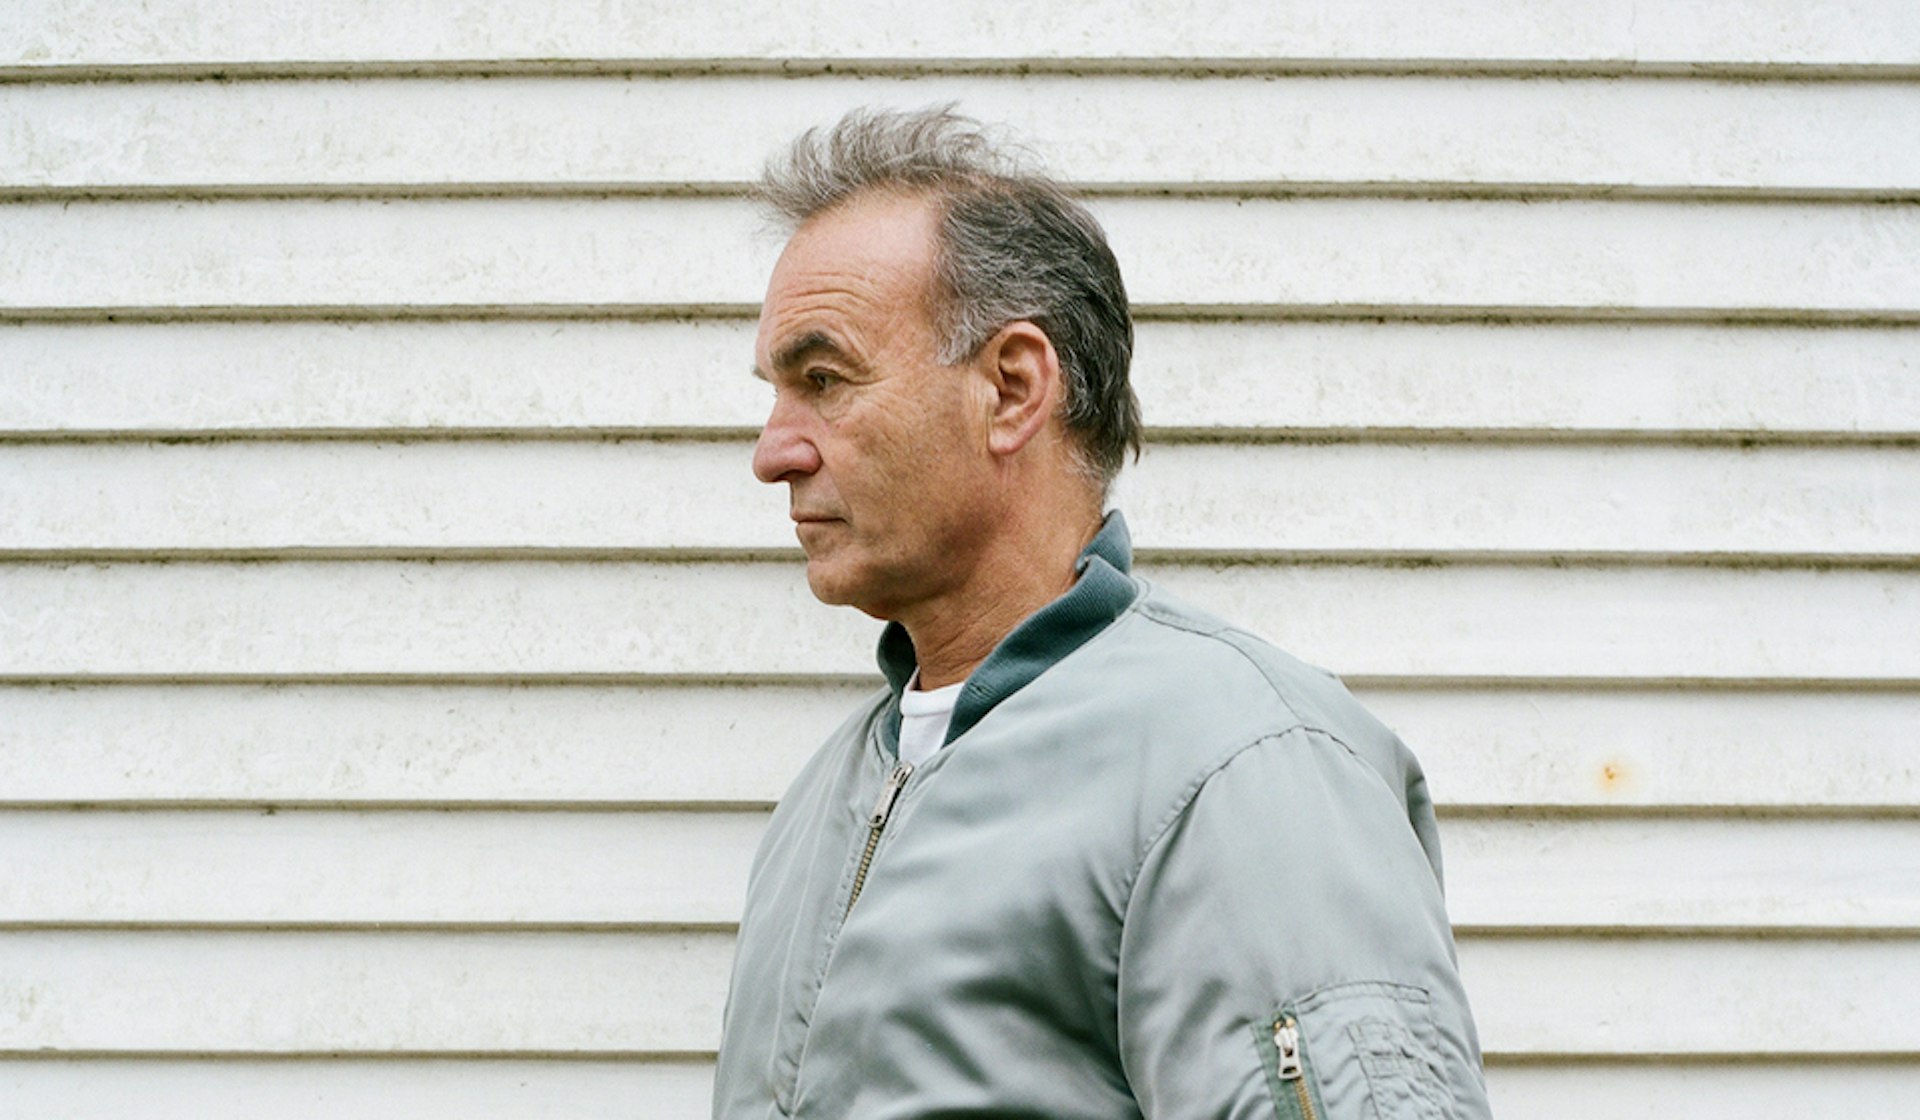 Nick Broomfield on the mistakes that made his career